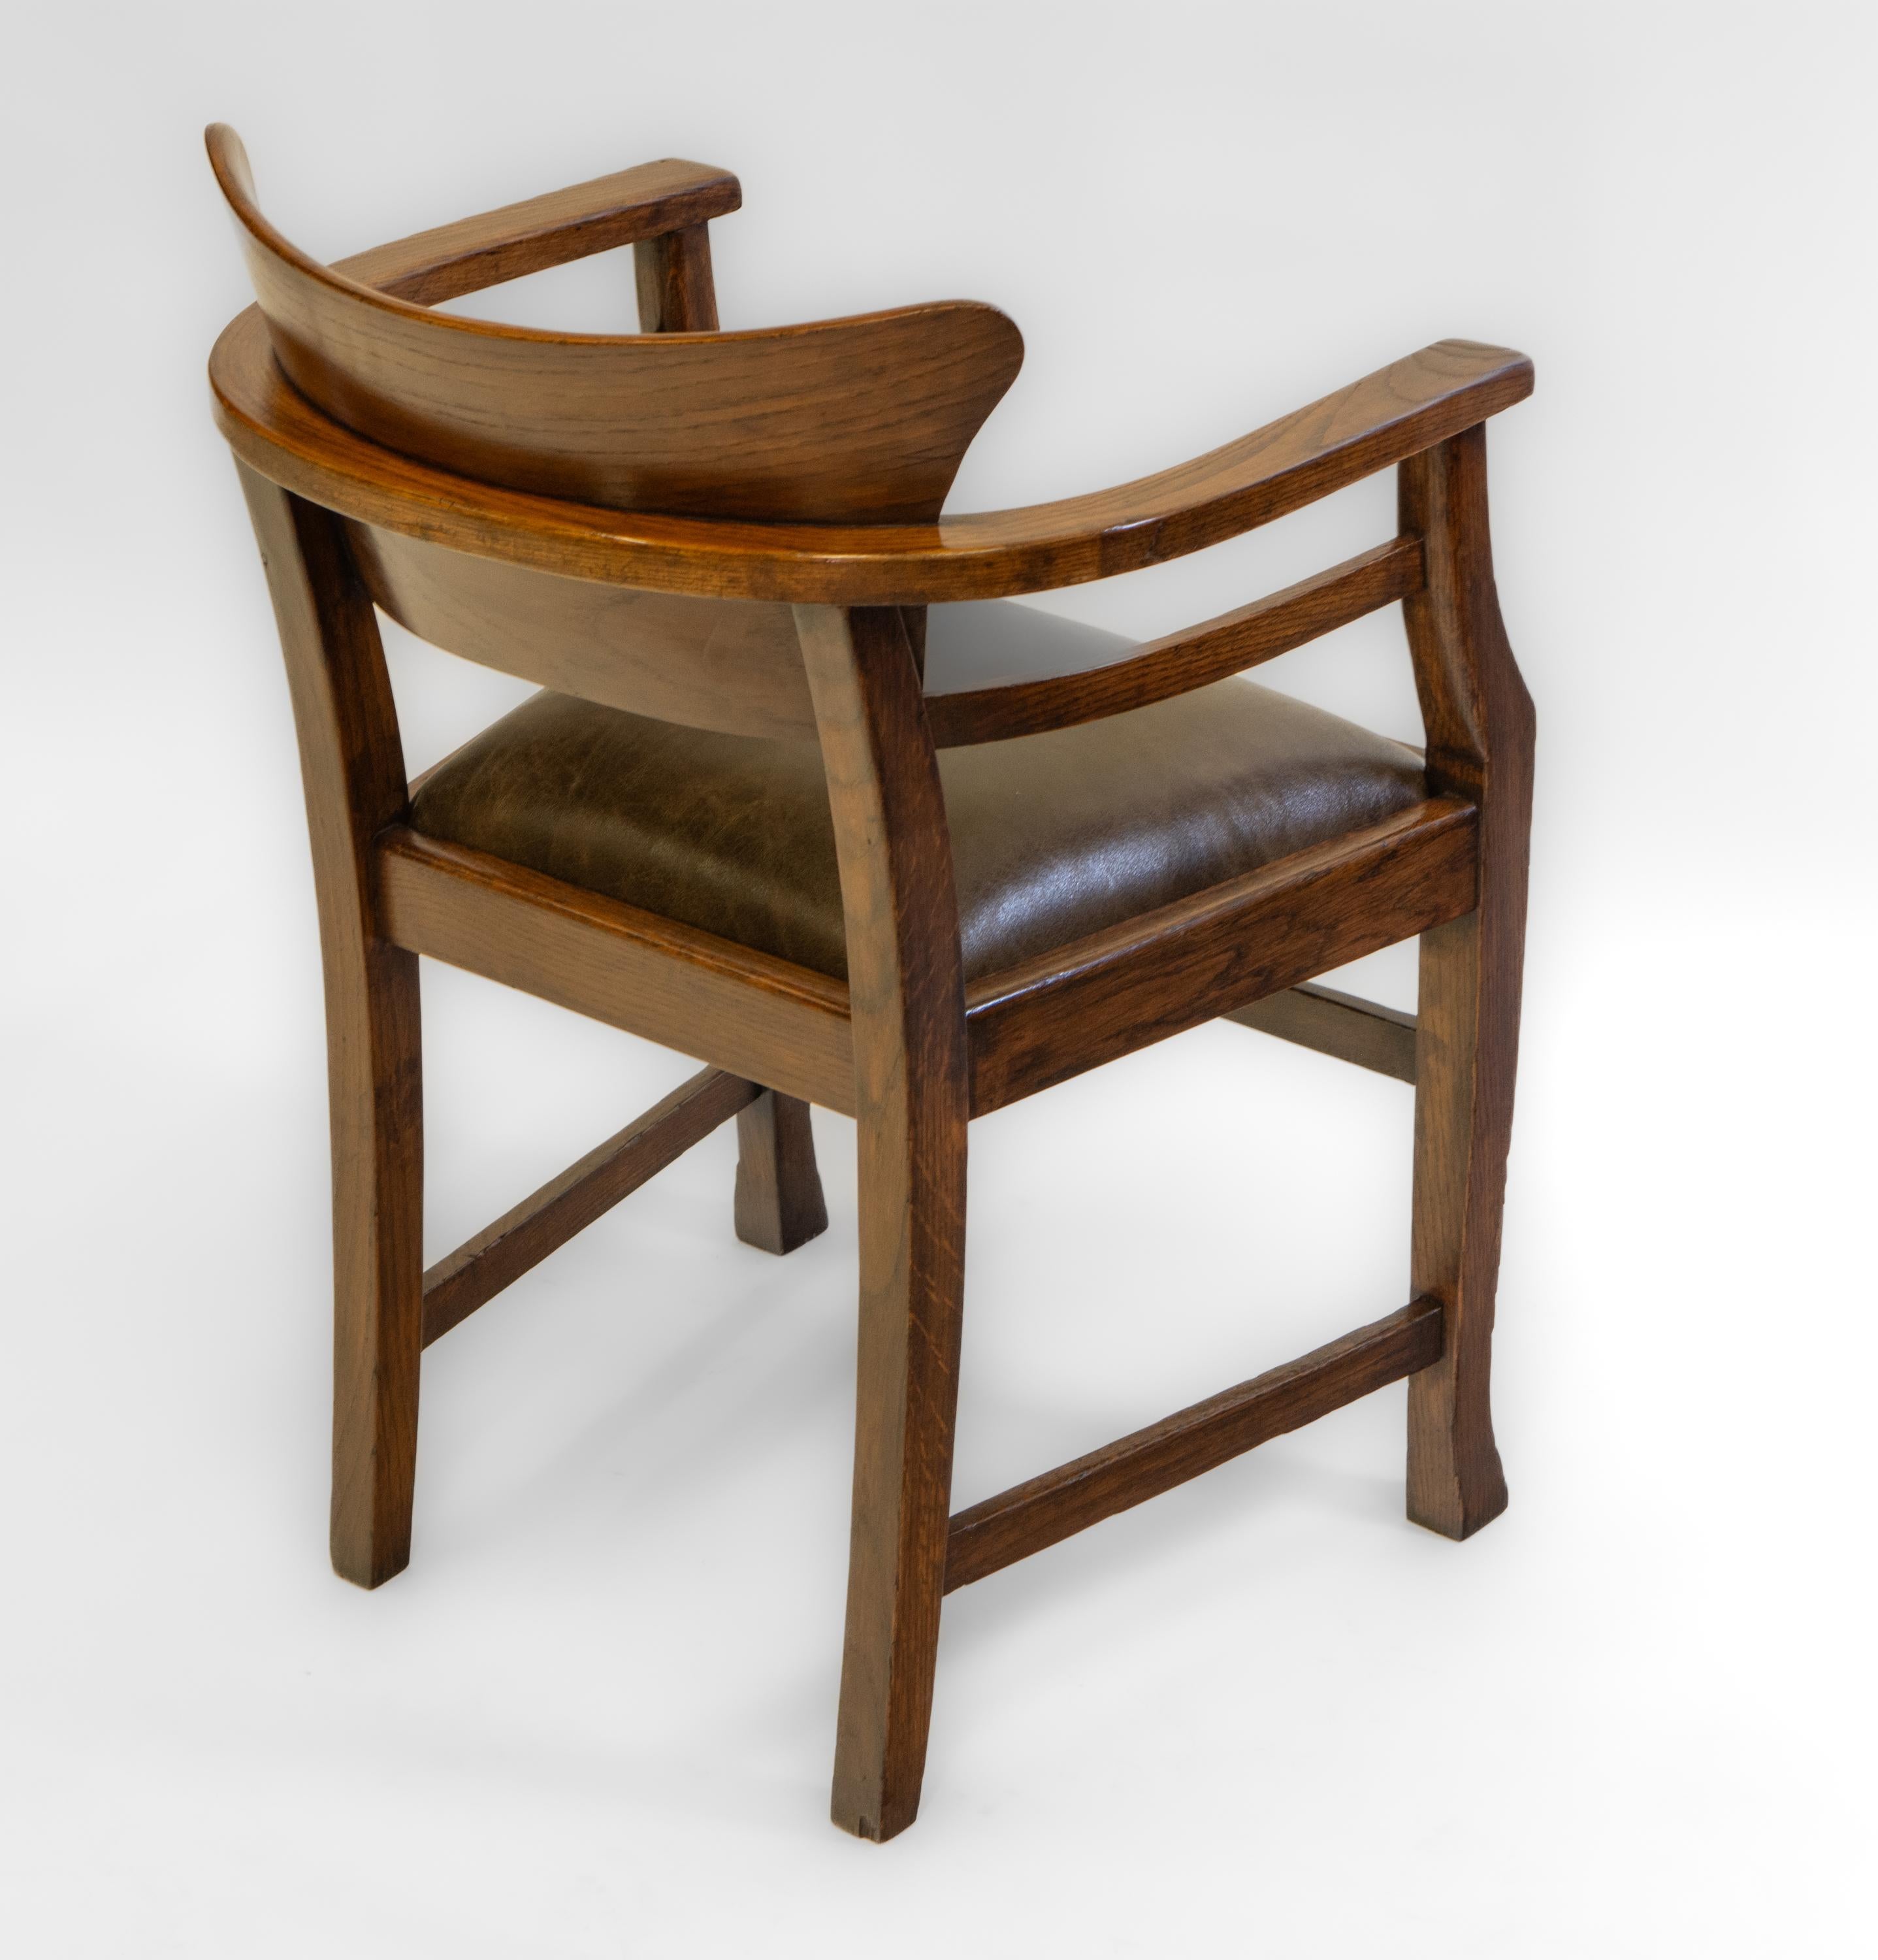 German Art & Crafts Oak and Leather Office Chair In The Richard Riemerschmid Manner 2 For Sale